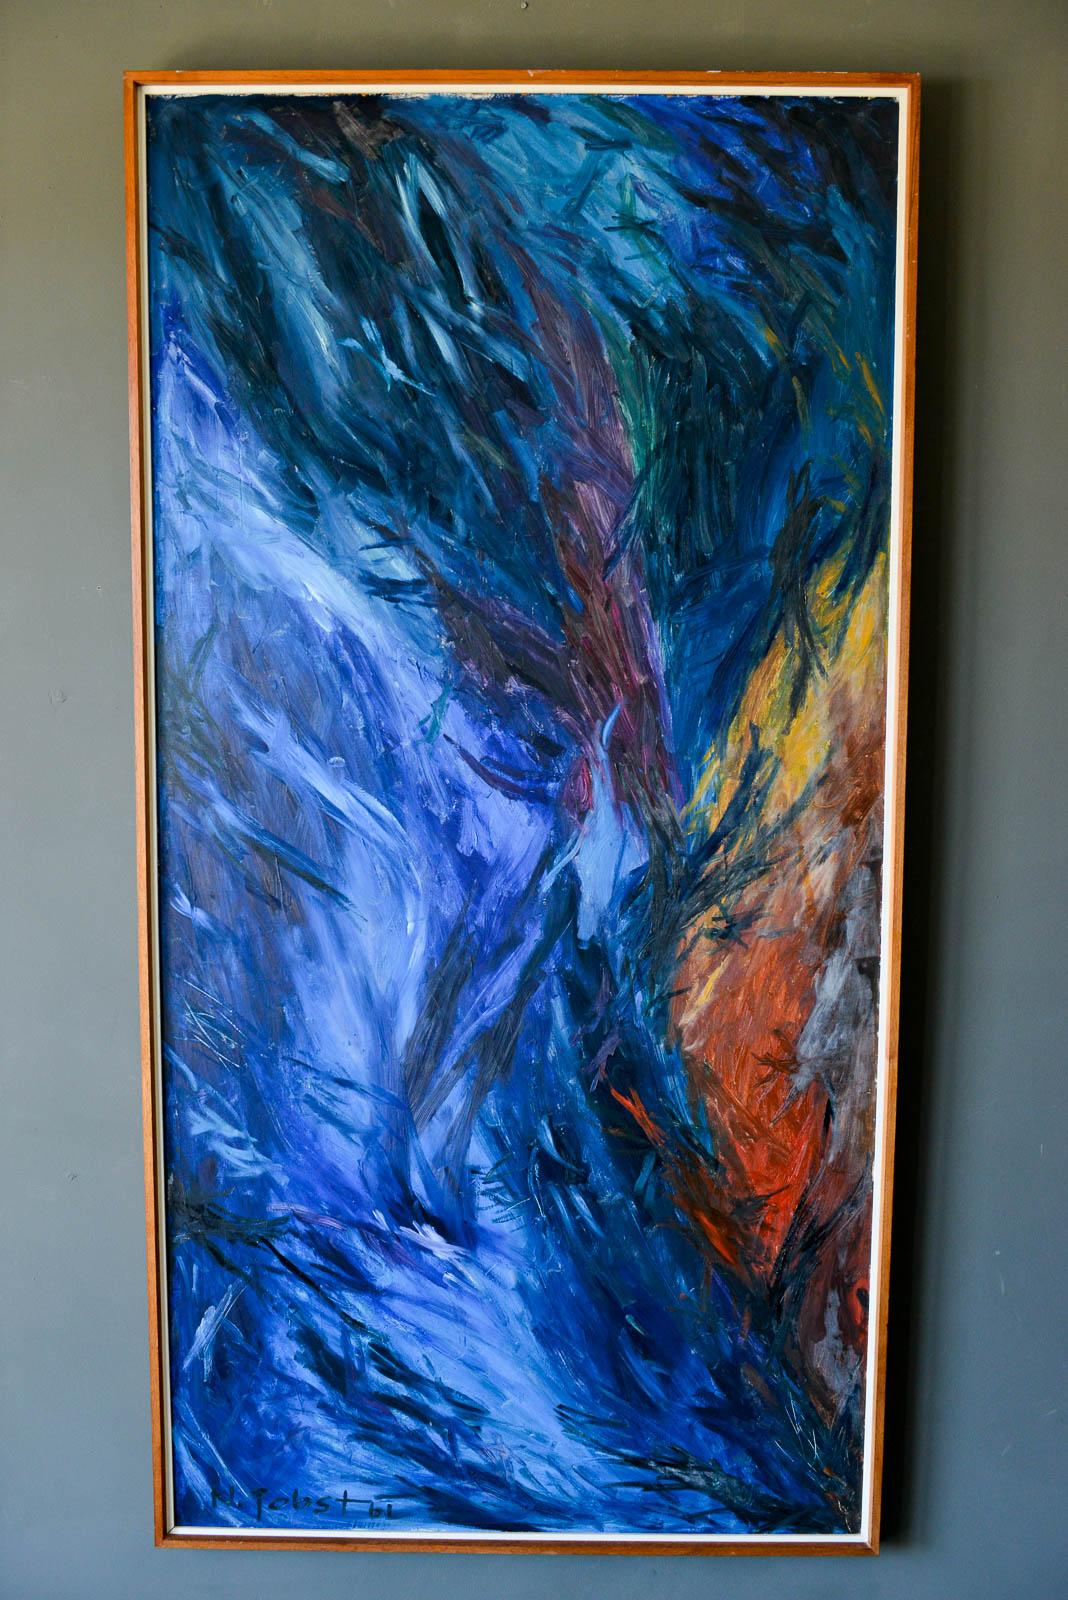 Large Vintage Abstract Painting by N. Jobst, 1961. Original piece with original vintage frame in overall very good condition with no staining. Wood frame is original along with linen matting. Can be hung vertical or horizontal.

Measures 74